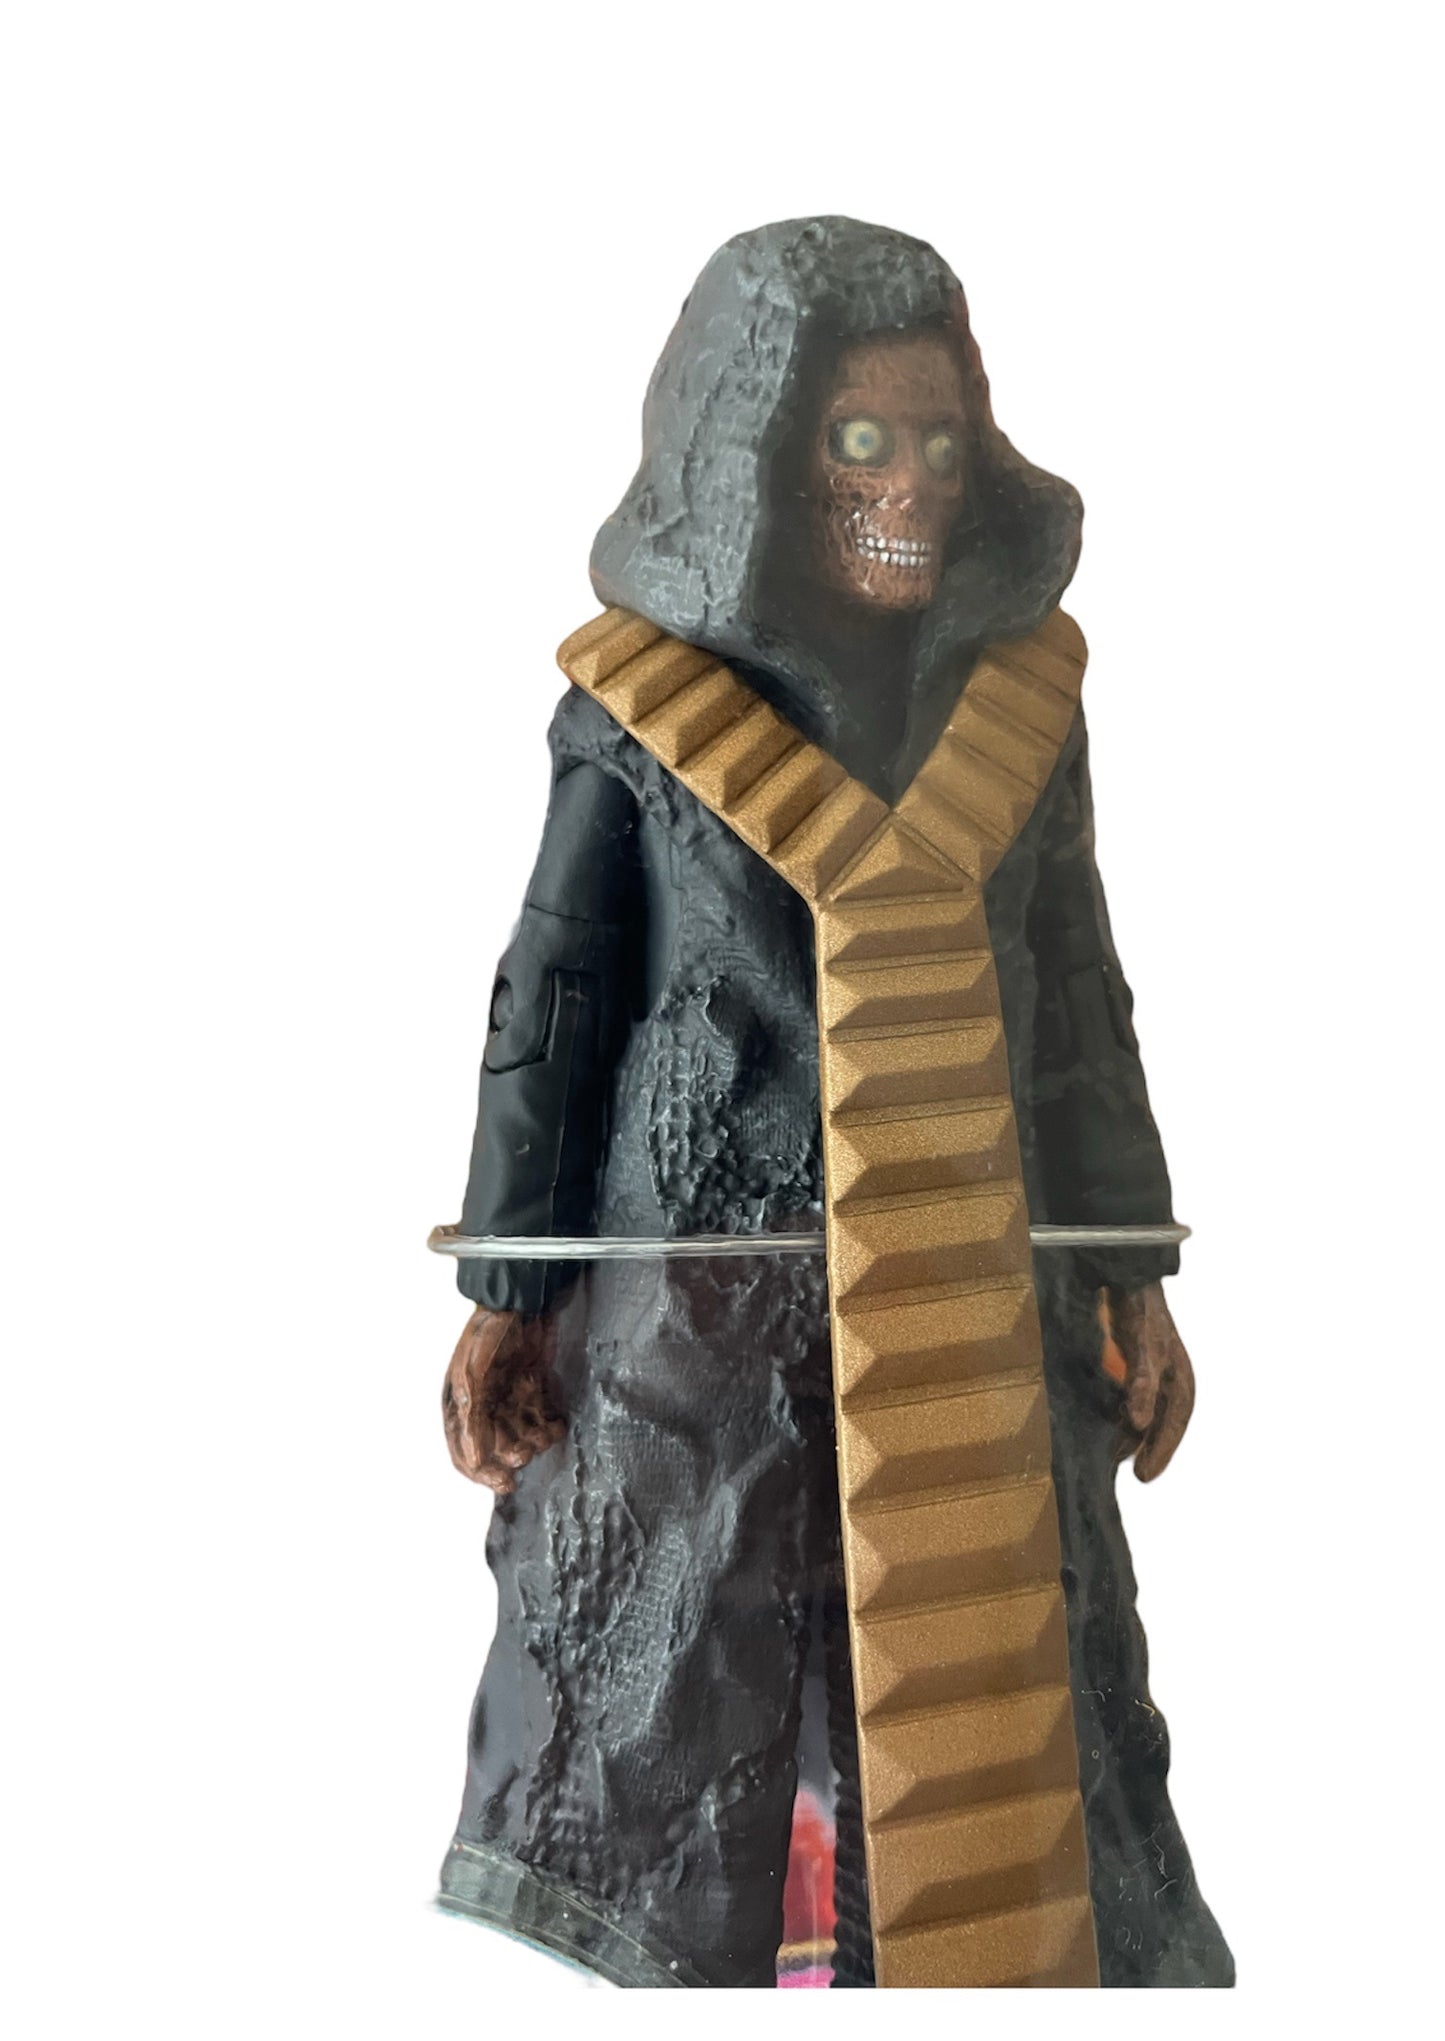 Vintage 1996 Doctor Dr Who Classic Series - The Master Action Figure With Sash & Staser - The Deadly Assassin - Brand New Factory Sealed Shop Stock Room Find